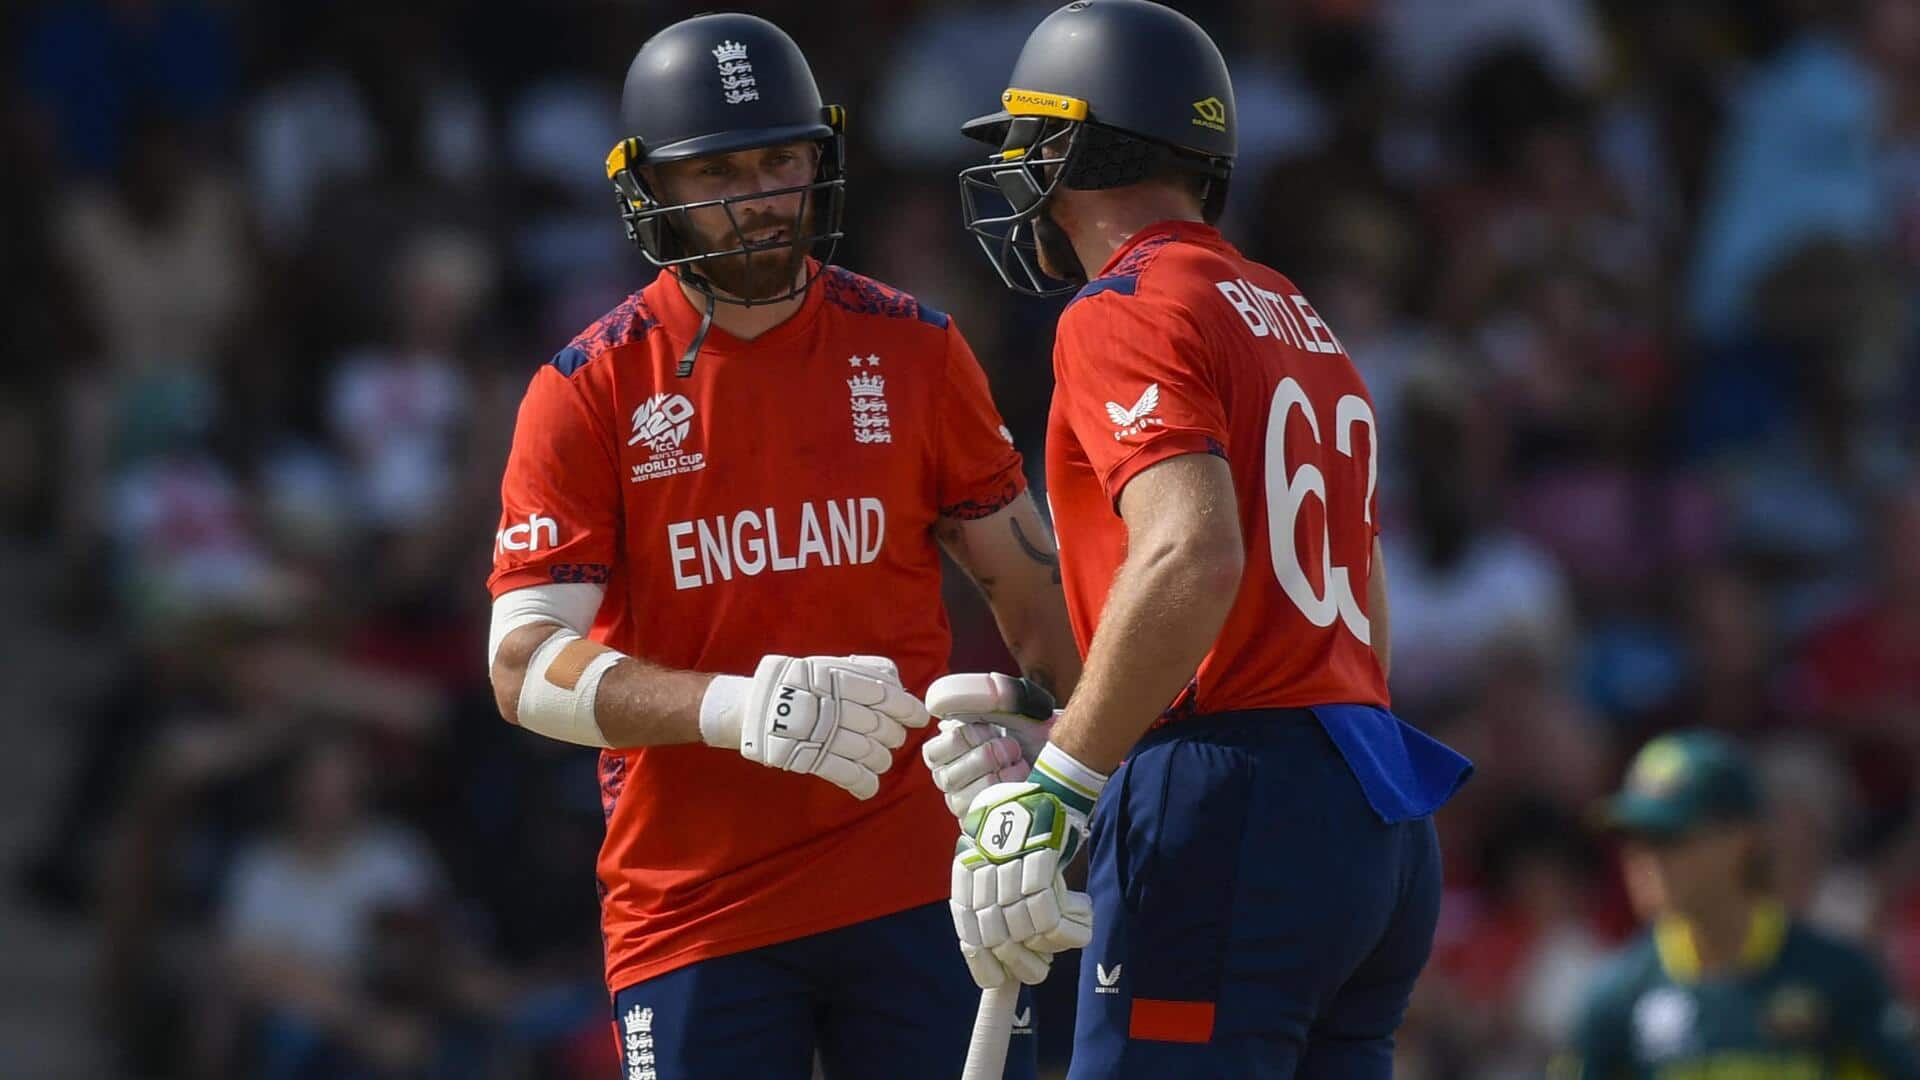 England vs Oman, T20 World Cup: Match preview and stats